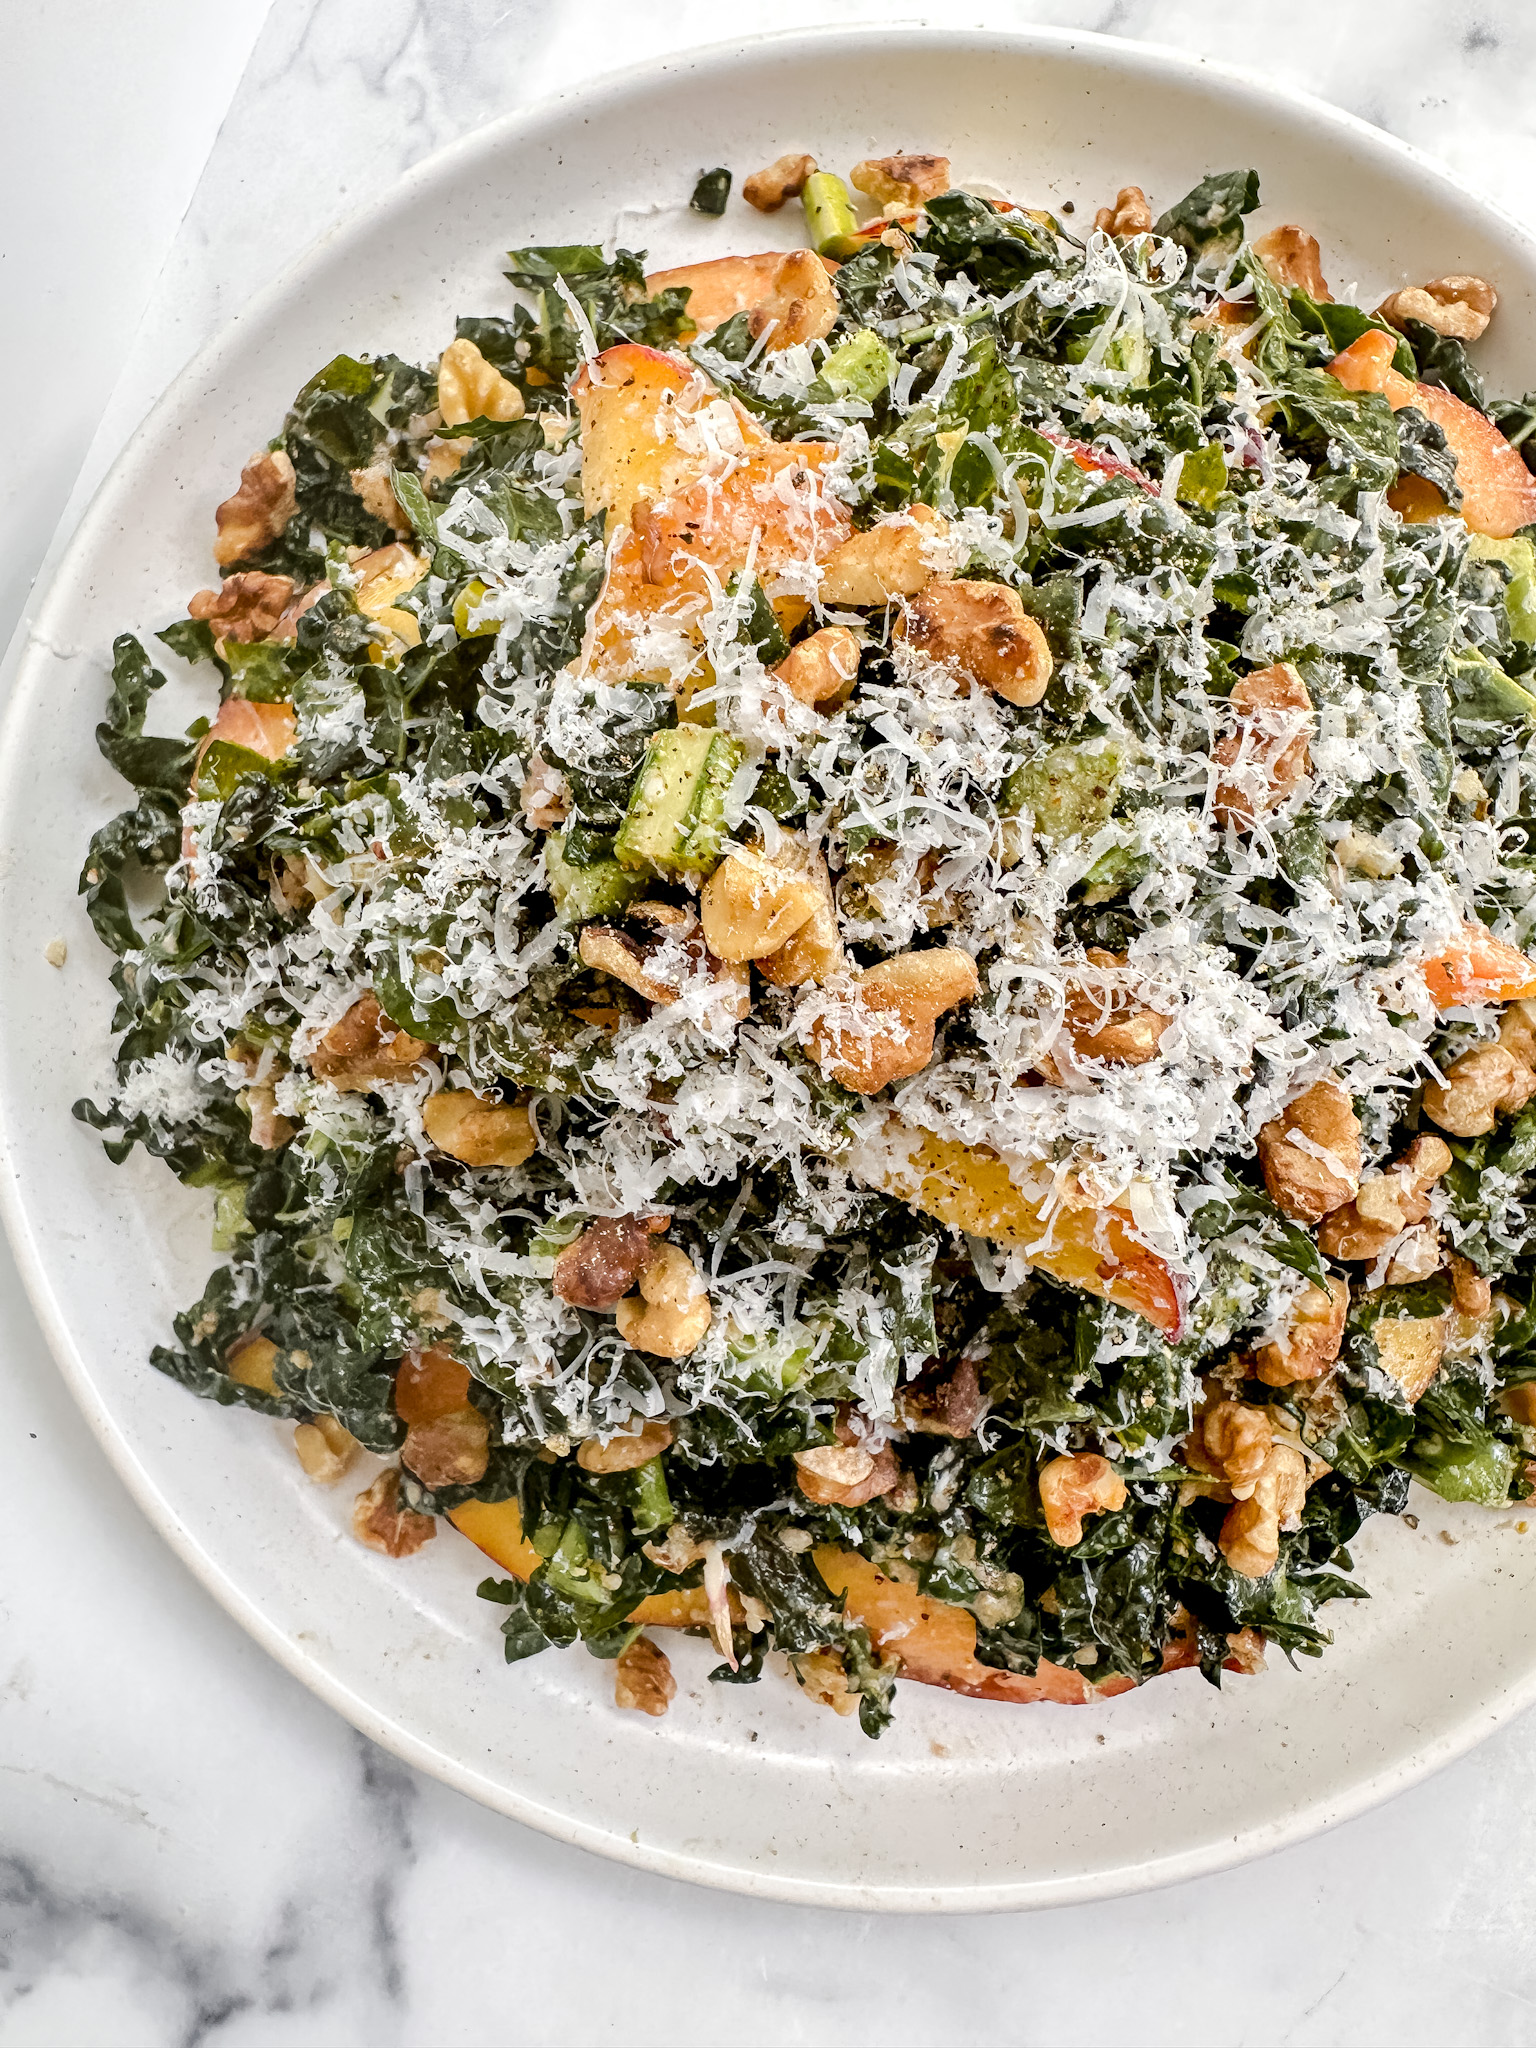 Tuscan Kale Salad with Peaches, Parmesan, and Toasted Walnut Vinaigrette